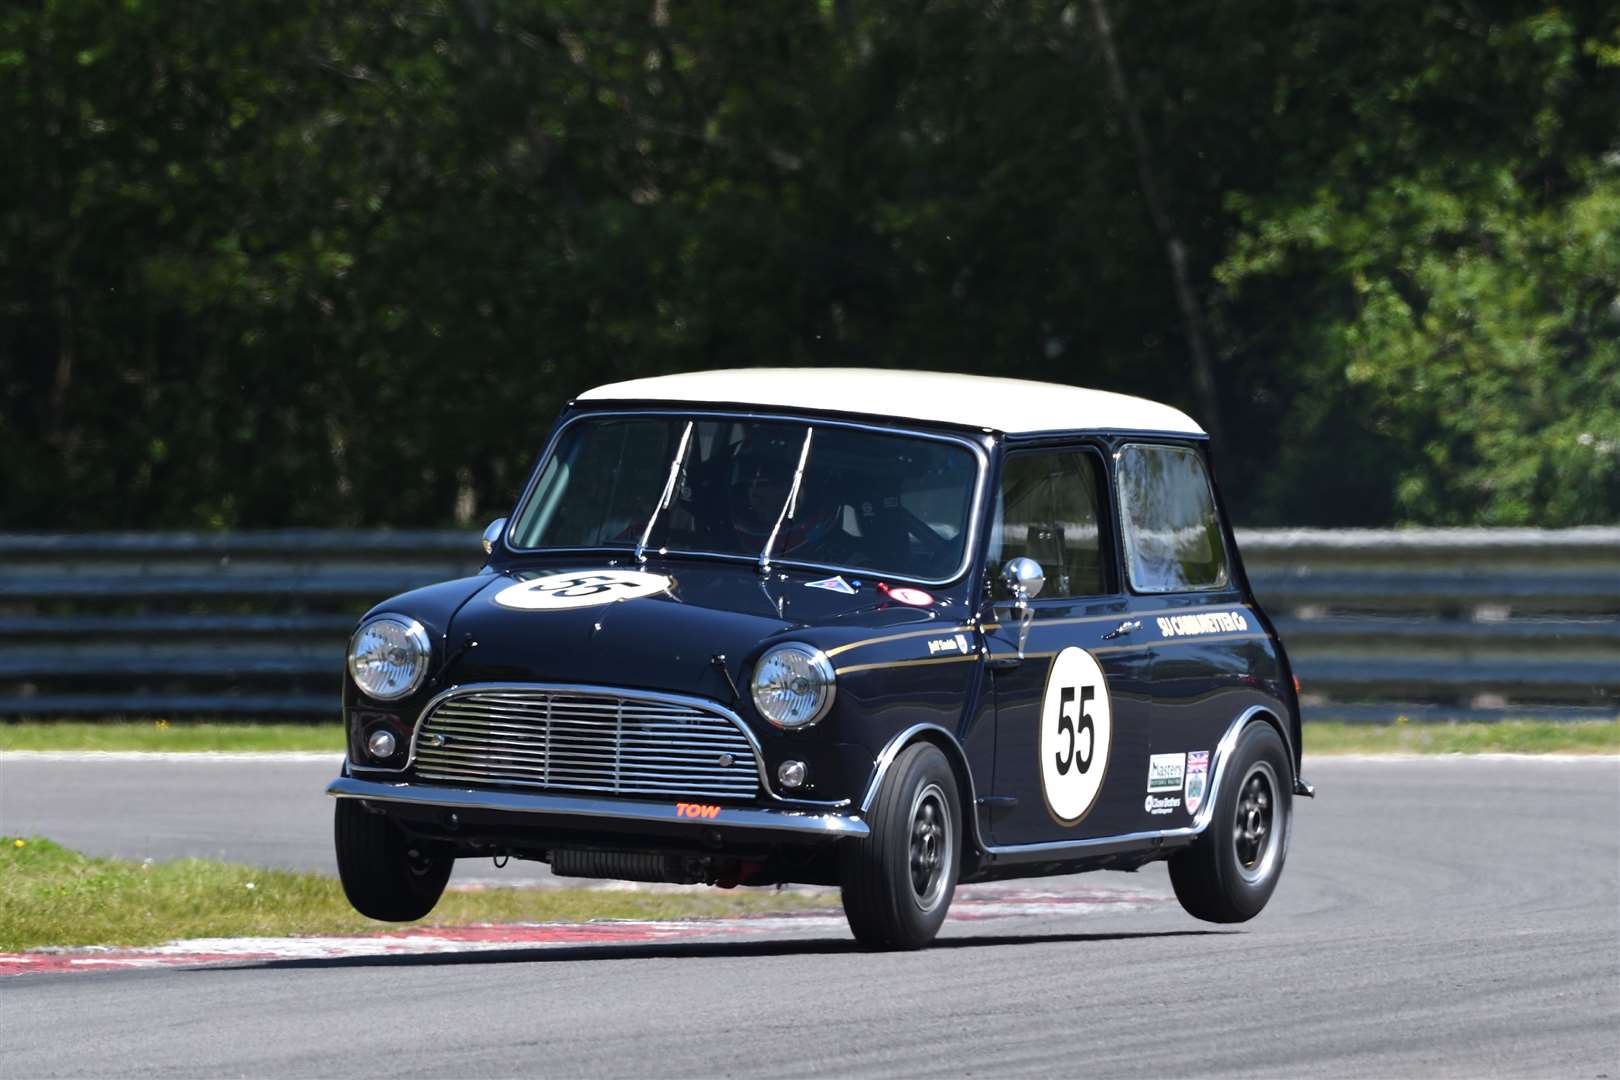 Former BTCC racer Jeff Smith flies over the kerb at Westfield bend, on his way to third place in the first Pre-66 Mini race. Picture: Simon Hildrew